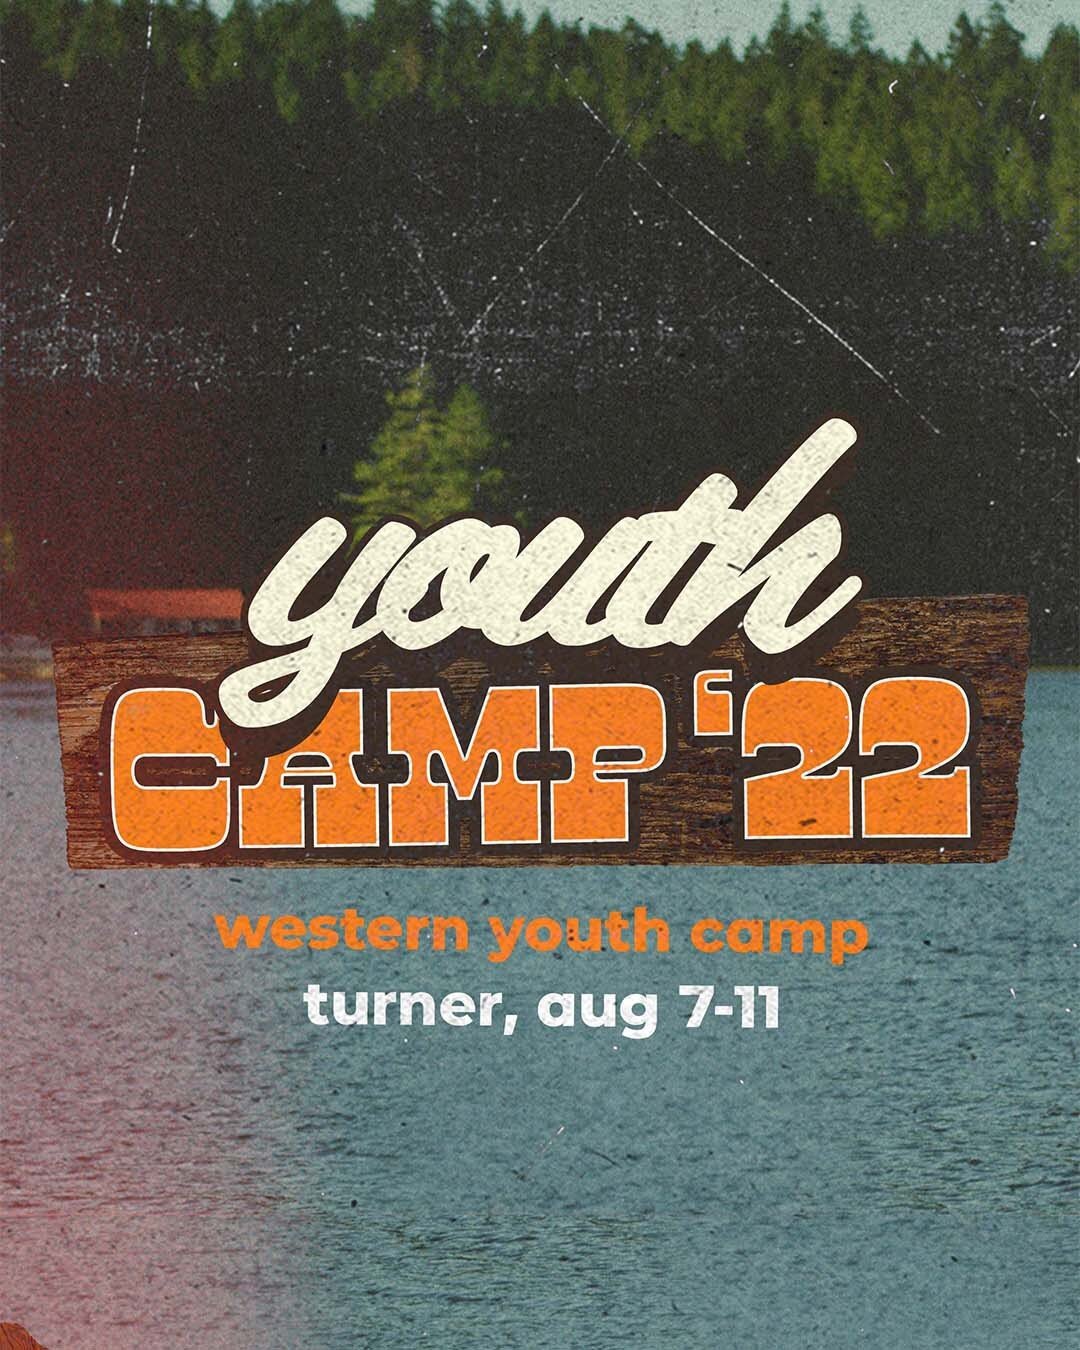 🗣 Calling all parents of youth! The
deadline to register for Summer Camp is quickly
approaching. Register &amp; pay the $50 by JULY 18th for
the best price - $260/camper! If you wait until after the 18th,
the last day to register will be July 25th &